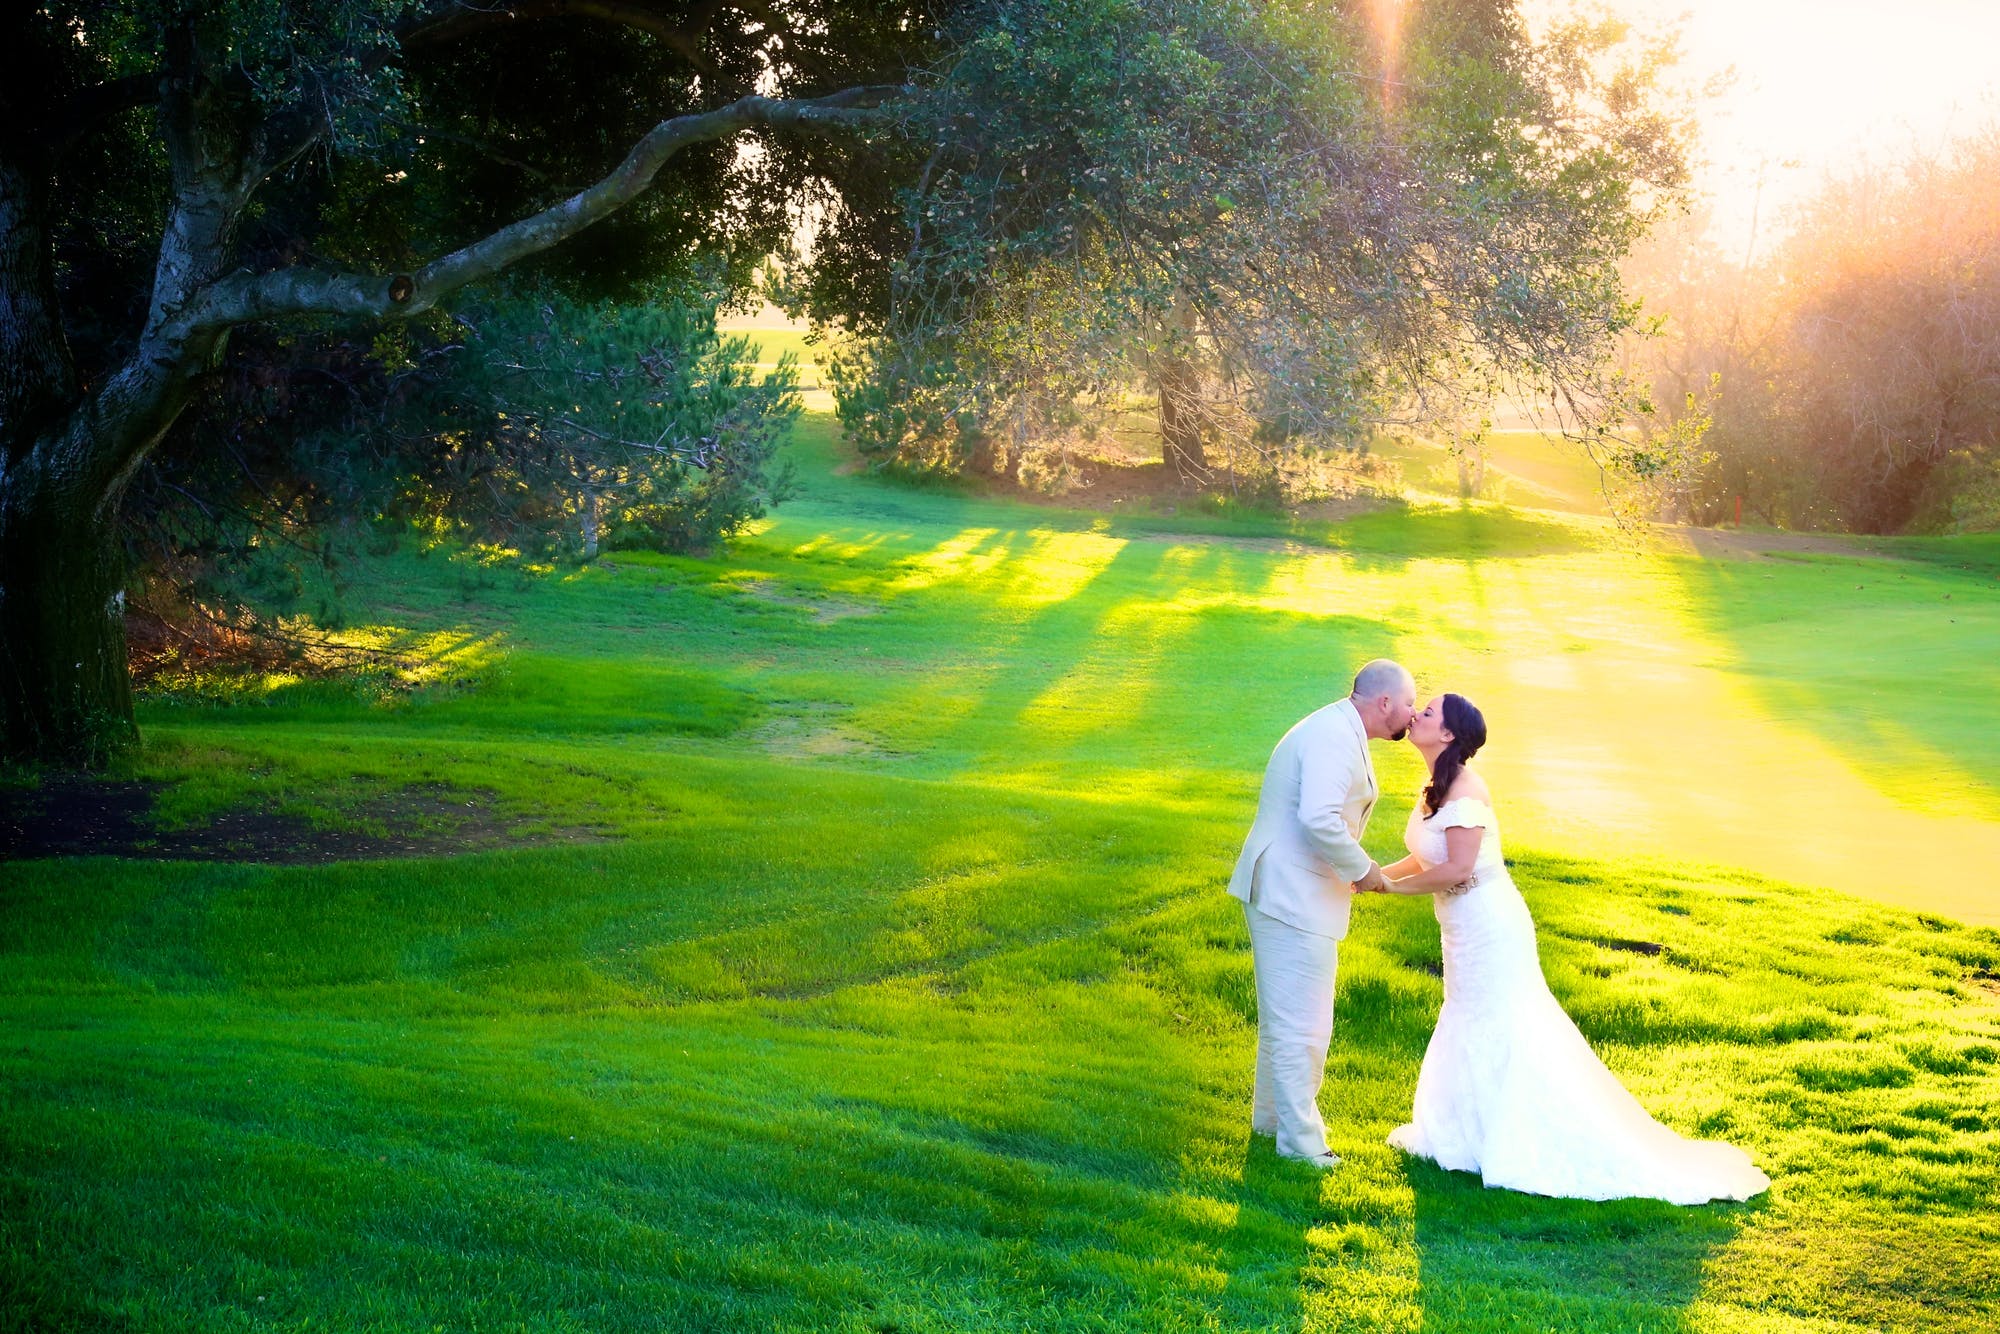 Sun-drenched kiss on a beautiful green lawn